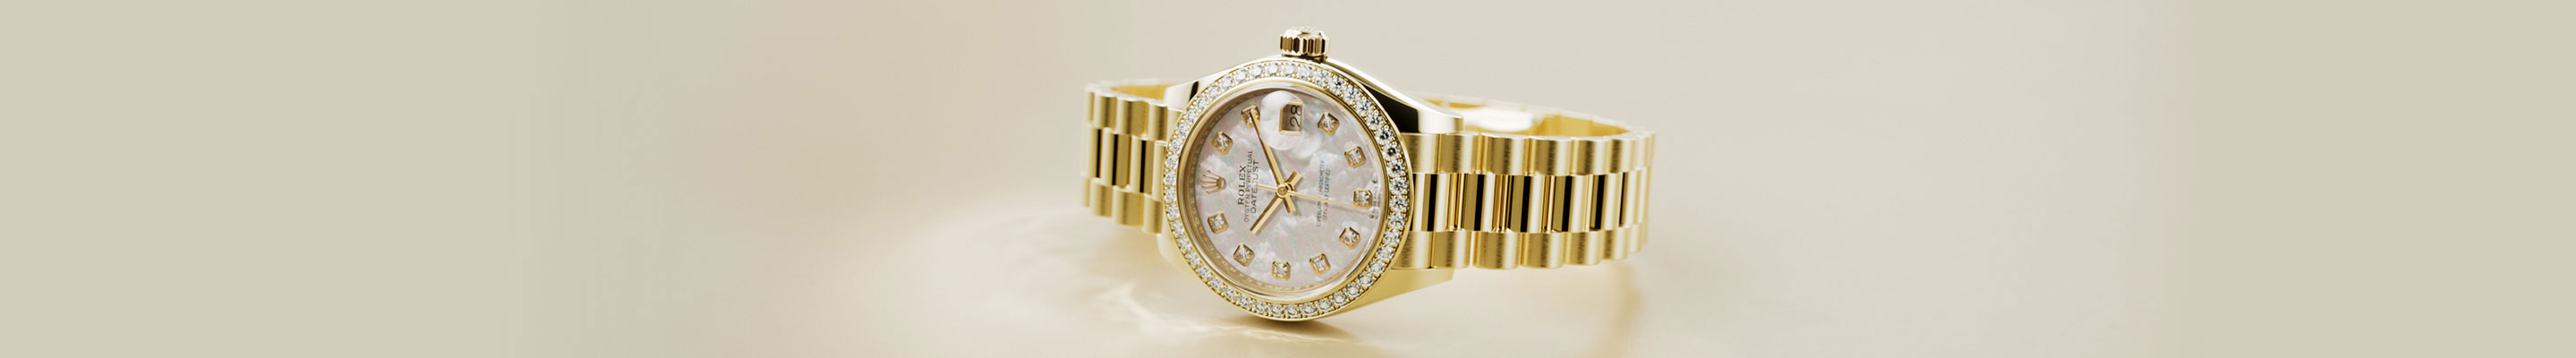 The Lady-Datejust